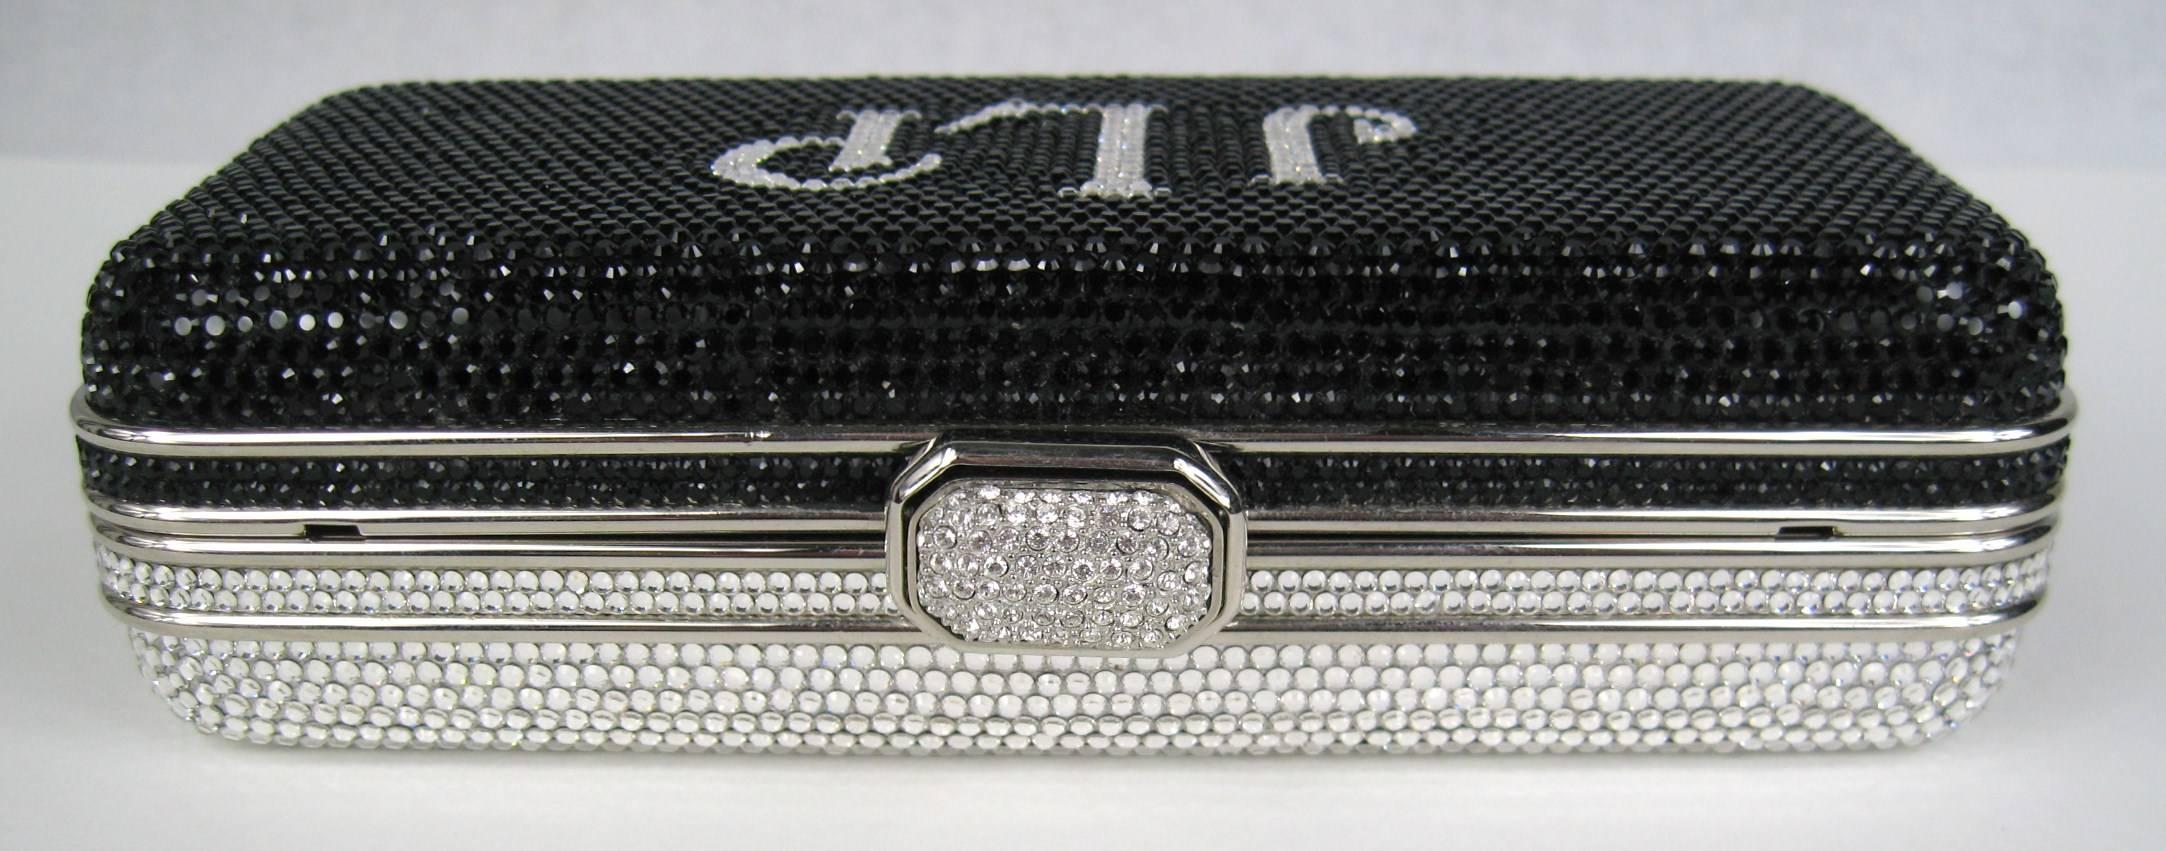 Judith Leiber JLP Minaudiere Clutch Double sided Black Silver New with Tag For Sale 1